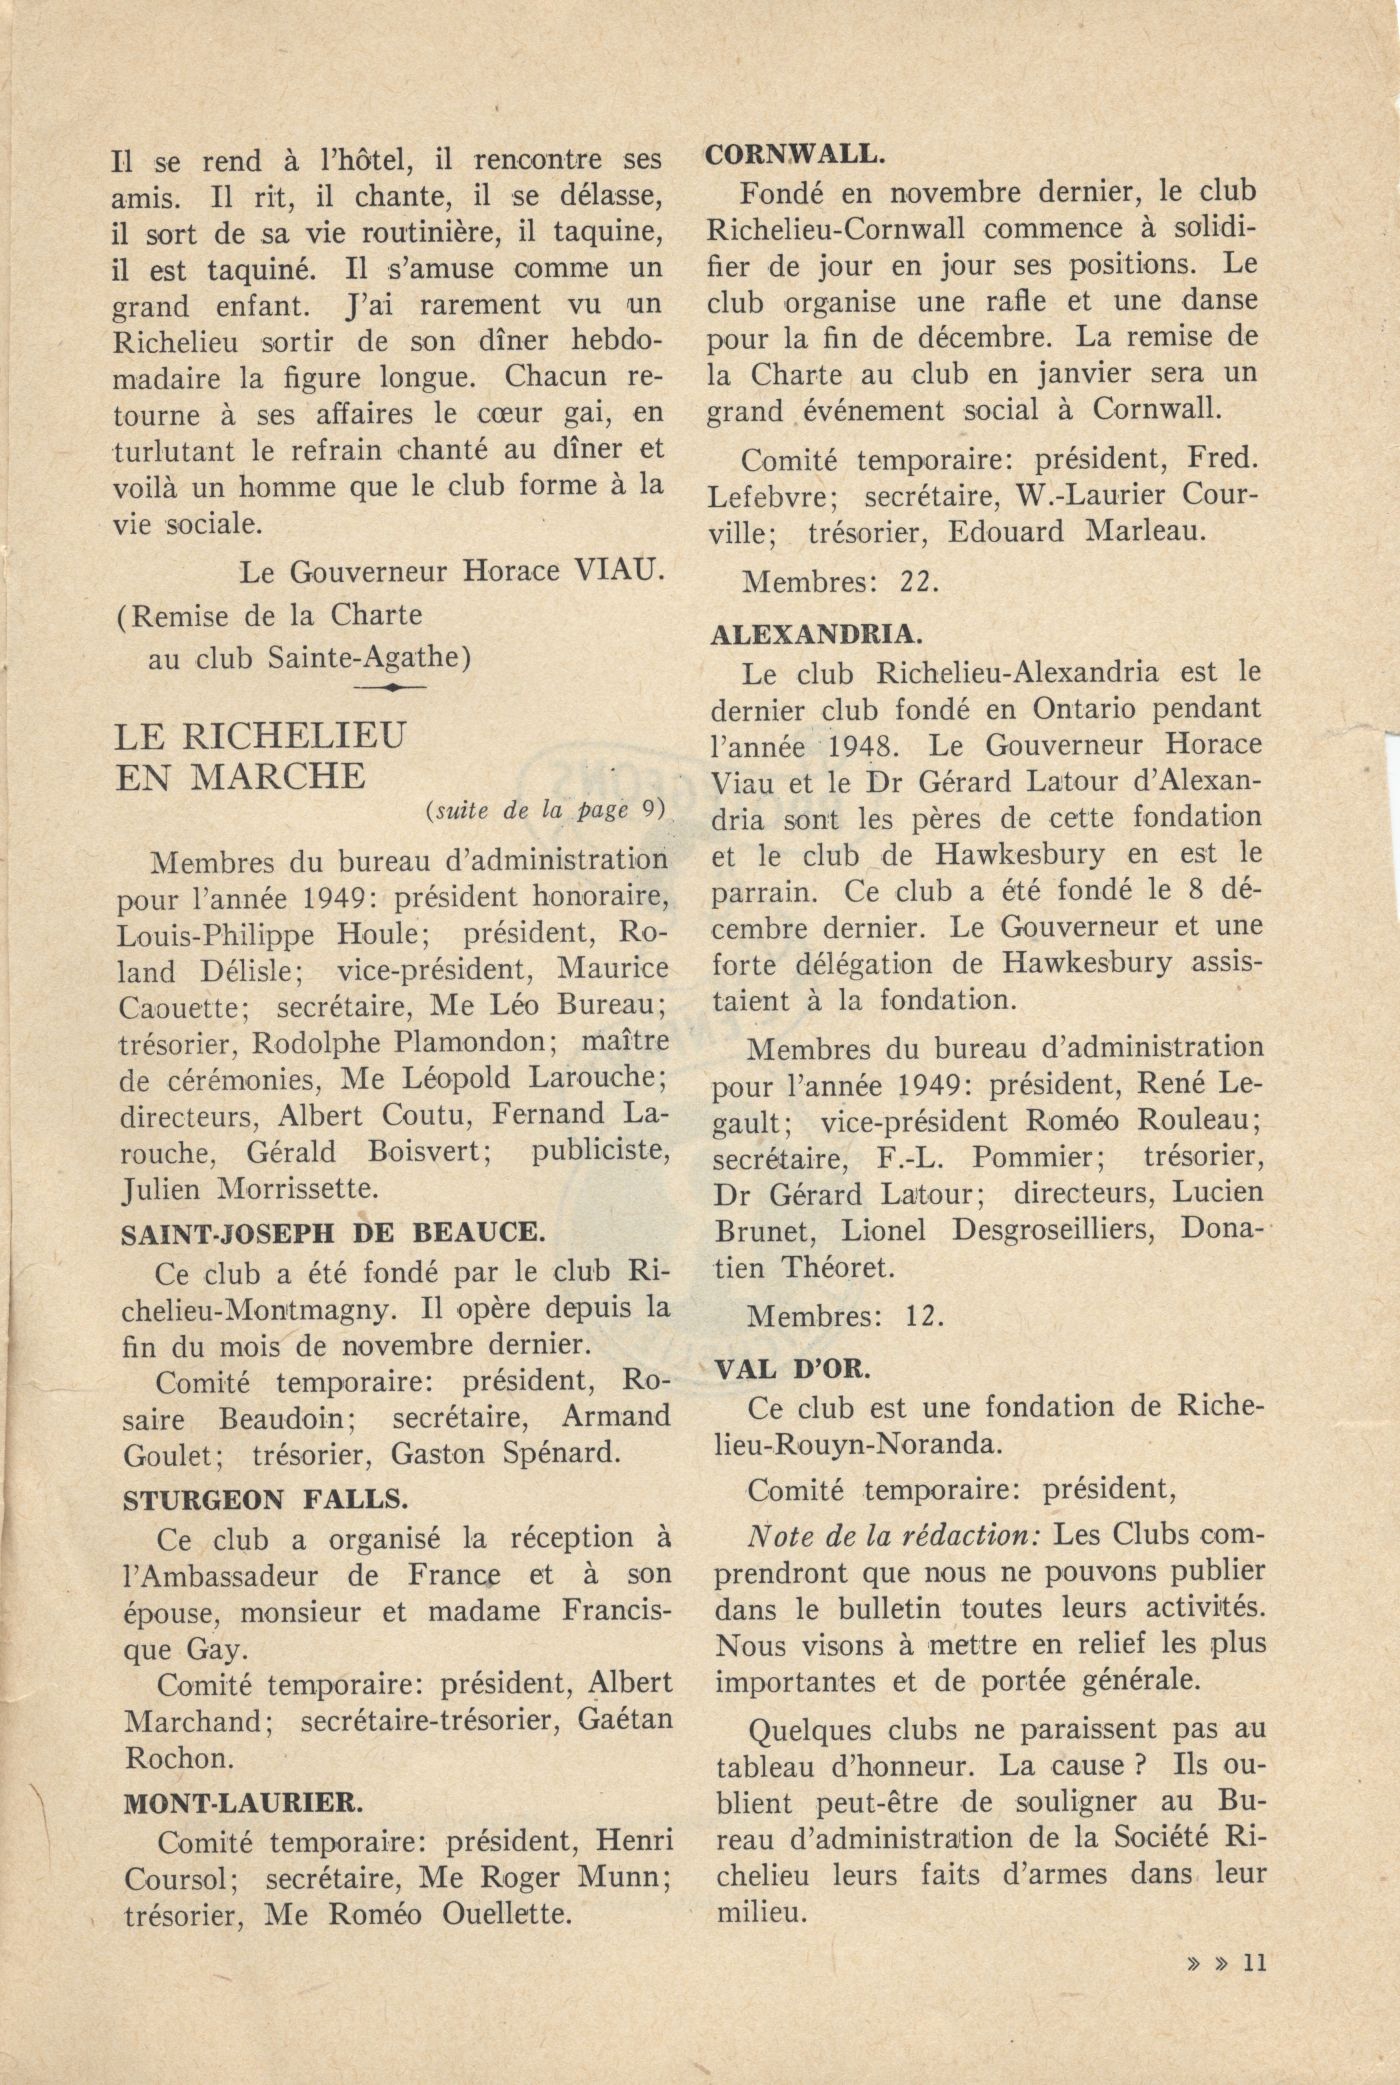 Bulletin printed in French. The title, place of publication, a logo and other details, appear on the cover page, followed by a table of contents. The text on page 10 is printed in two columns; it continues on the following page and is signed. Page 11 offers short texts regarding different communities.